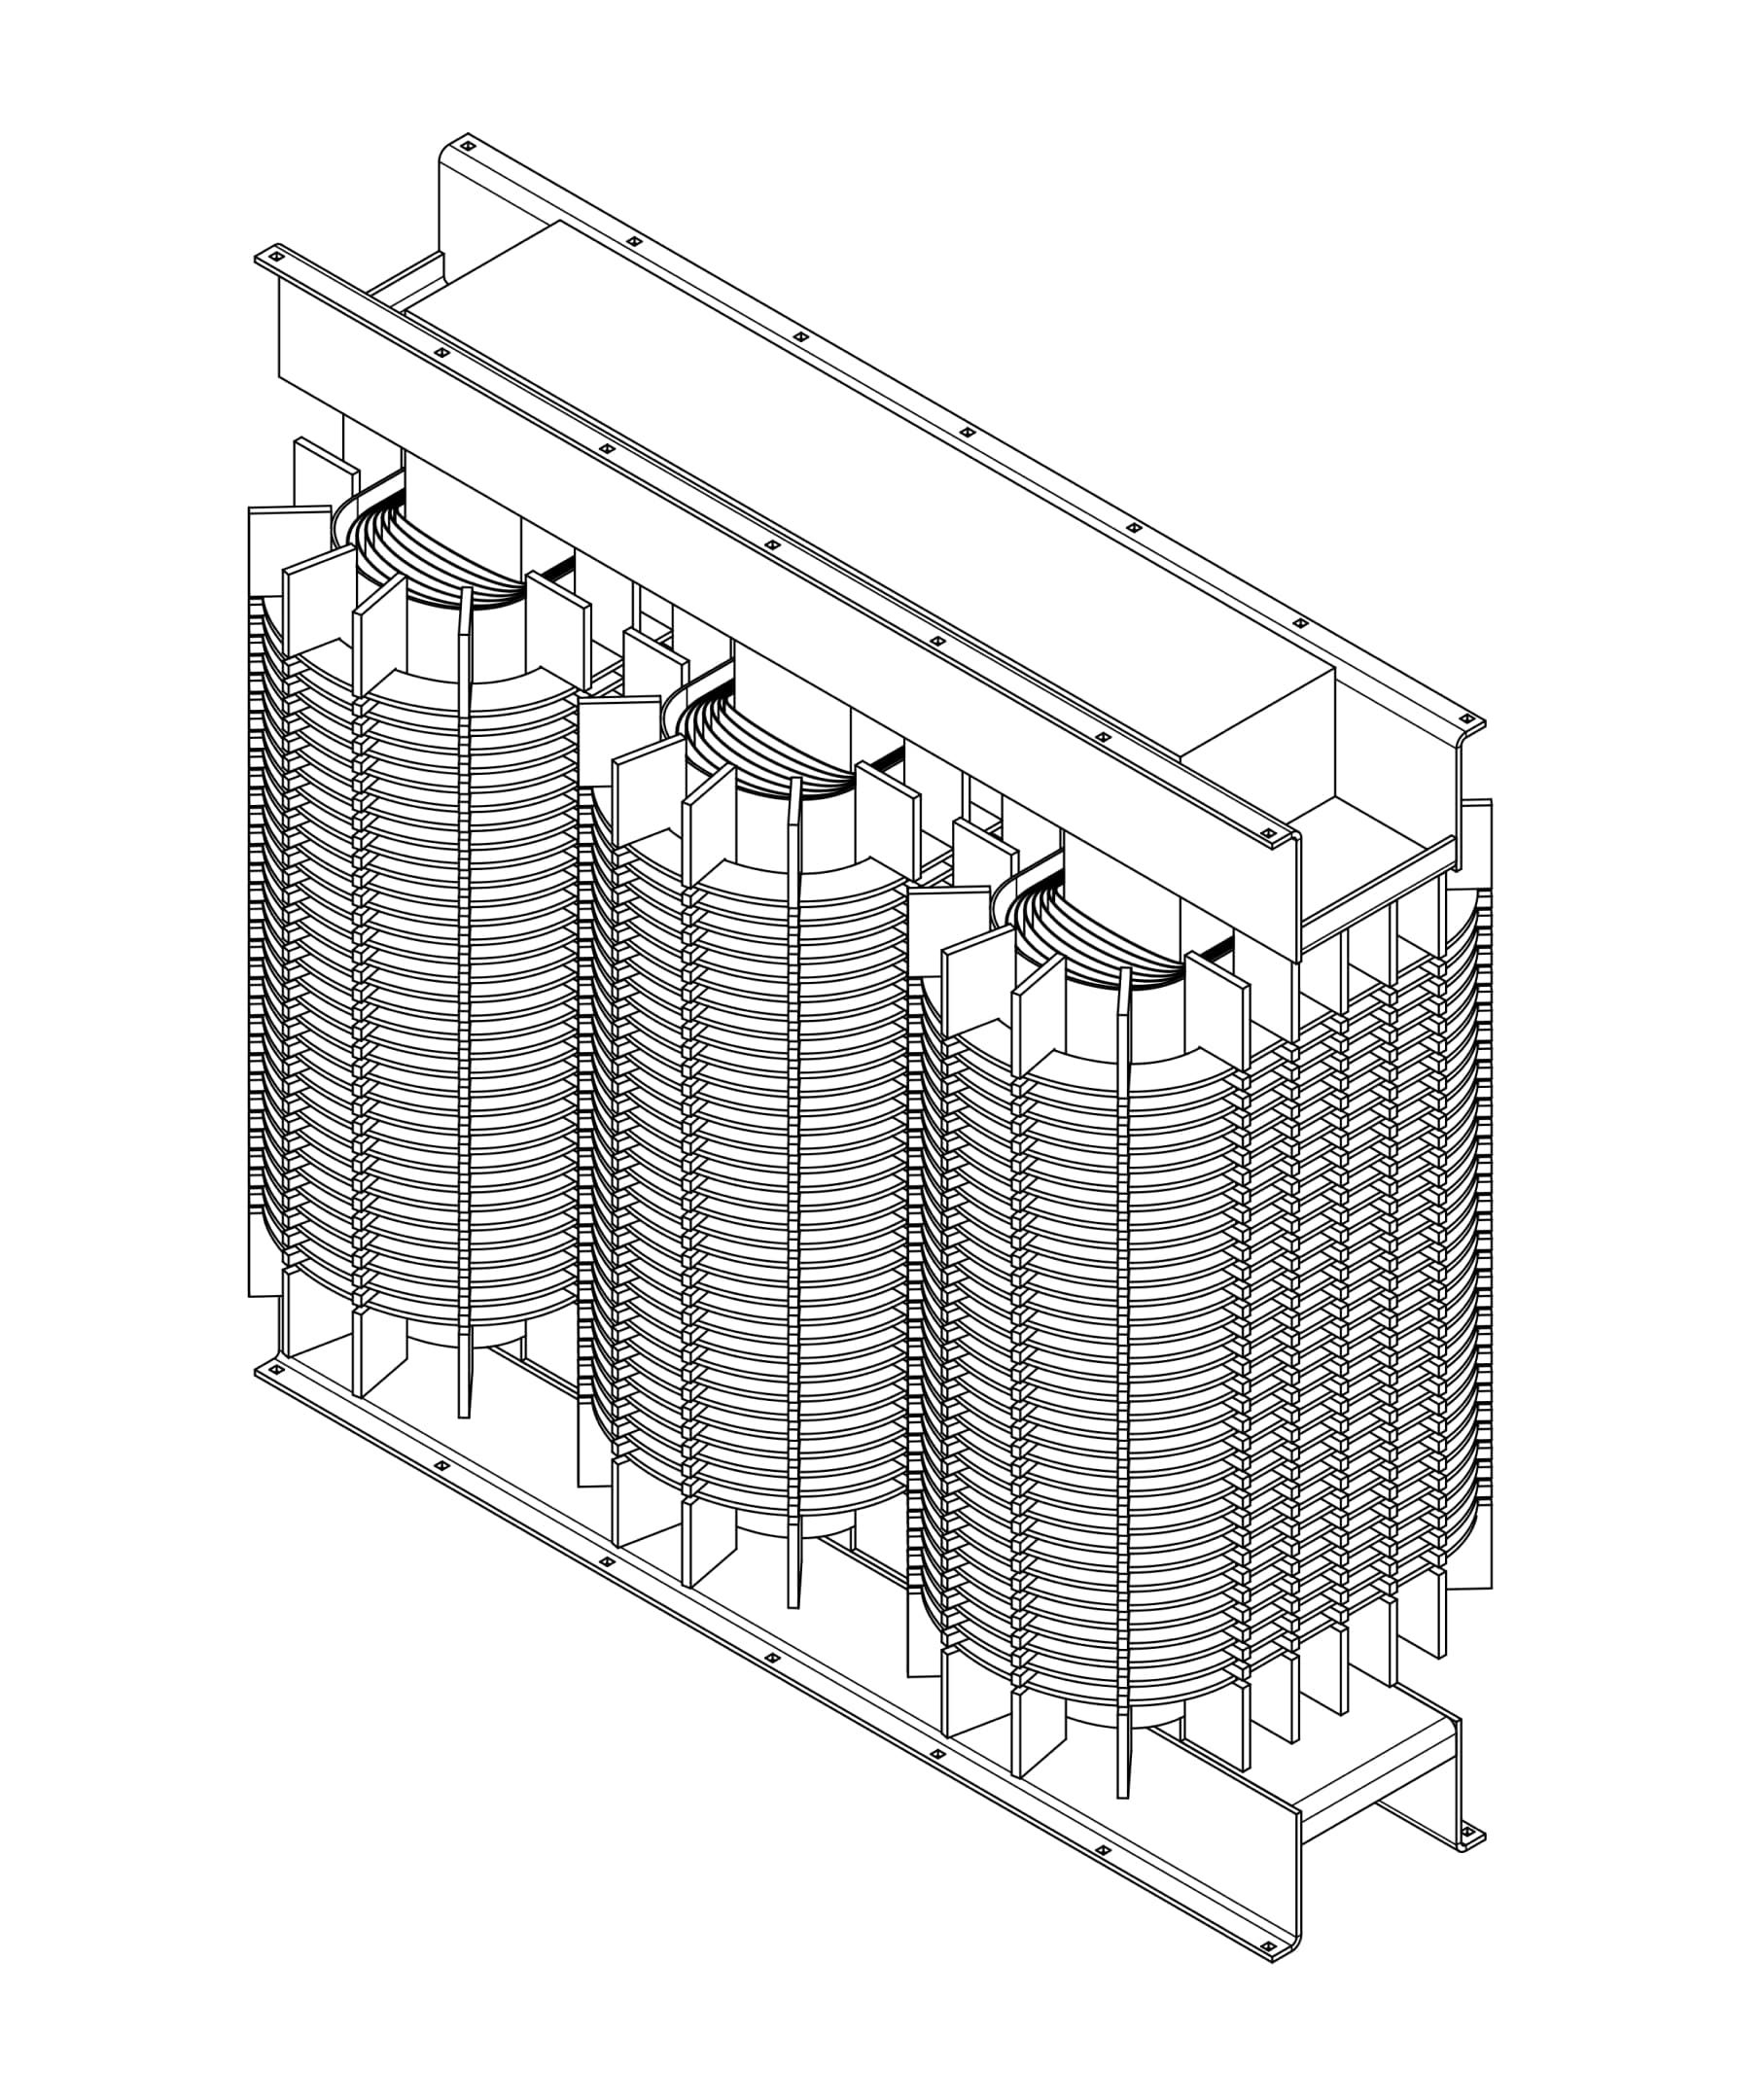 Medium voltage dry type transformer core and coil